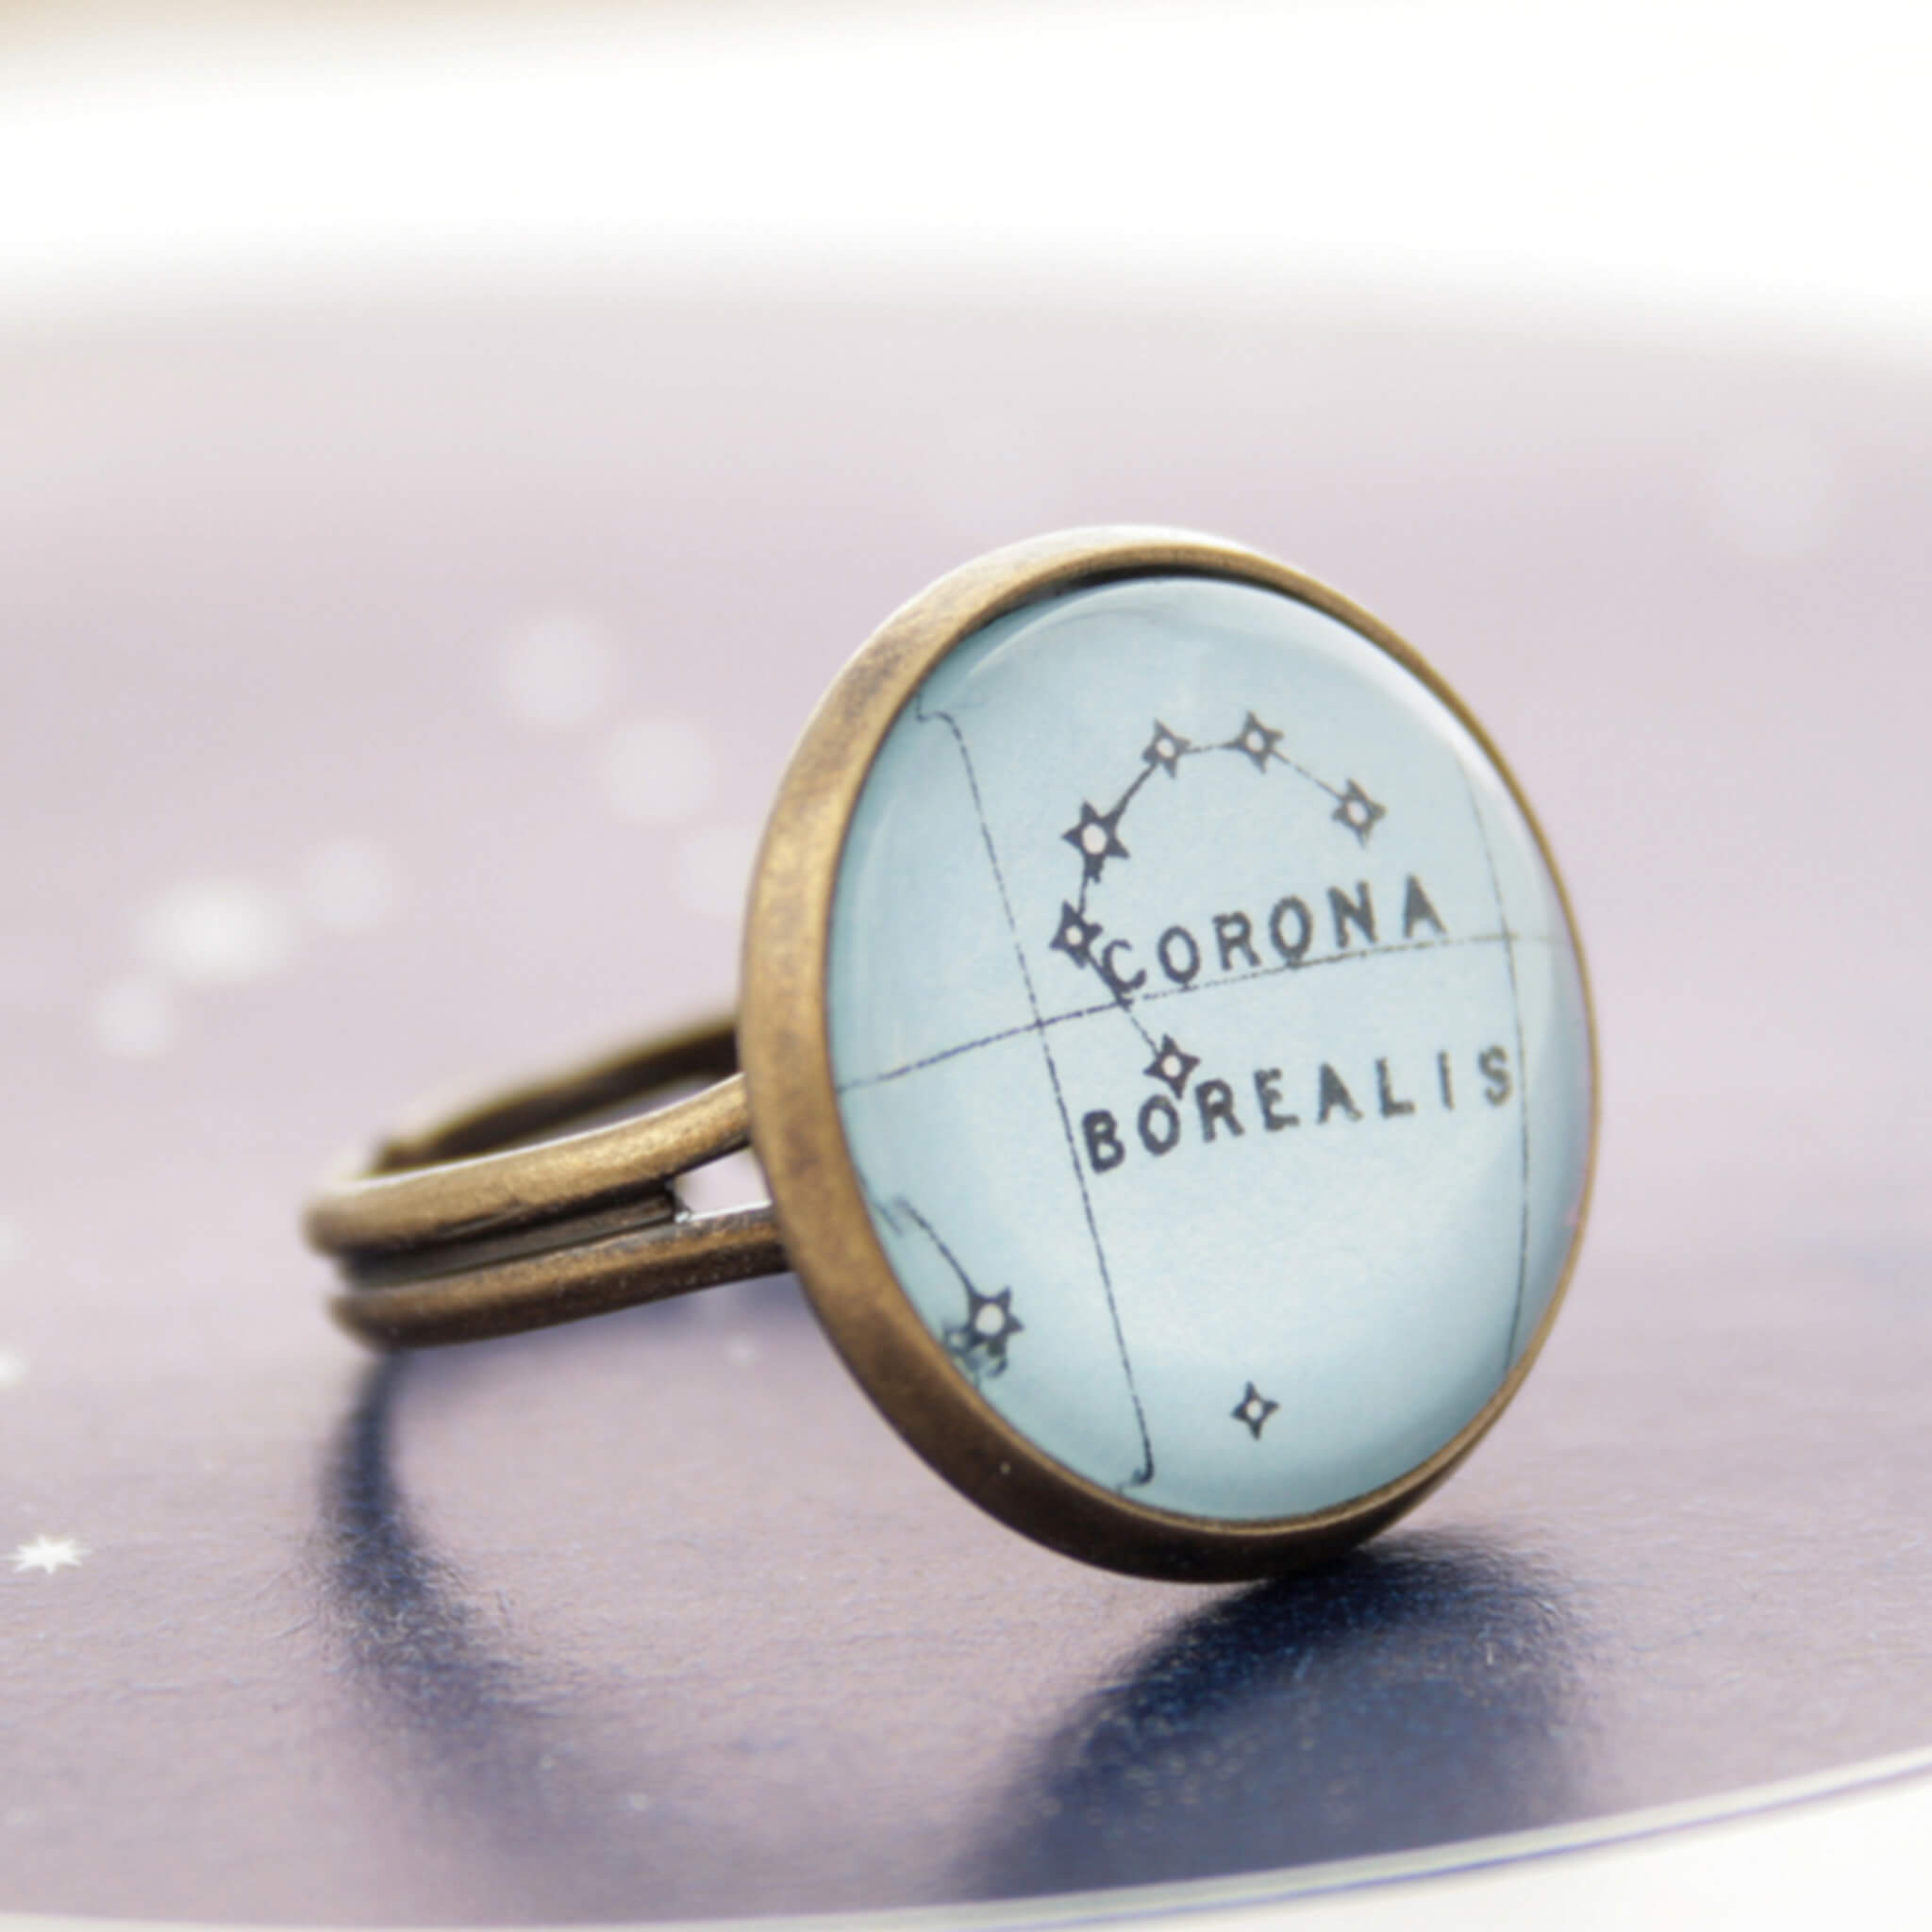 Bronze ring featuring map of heaven with Corona Borealis